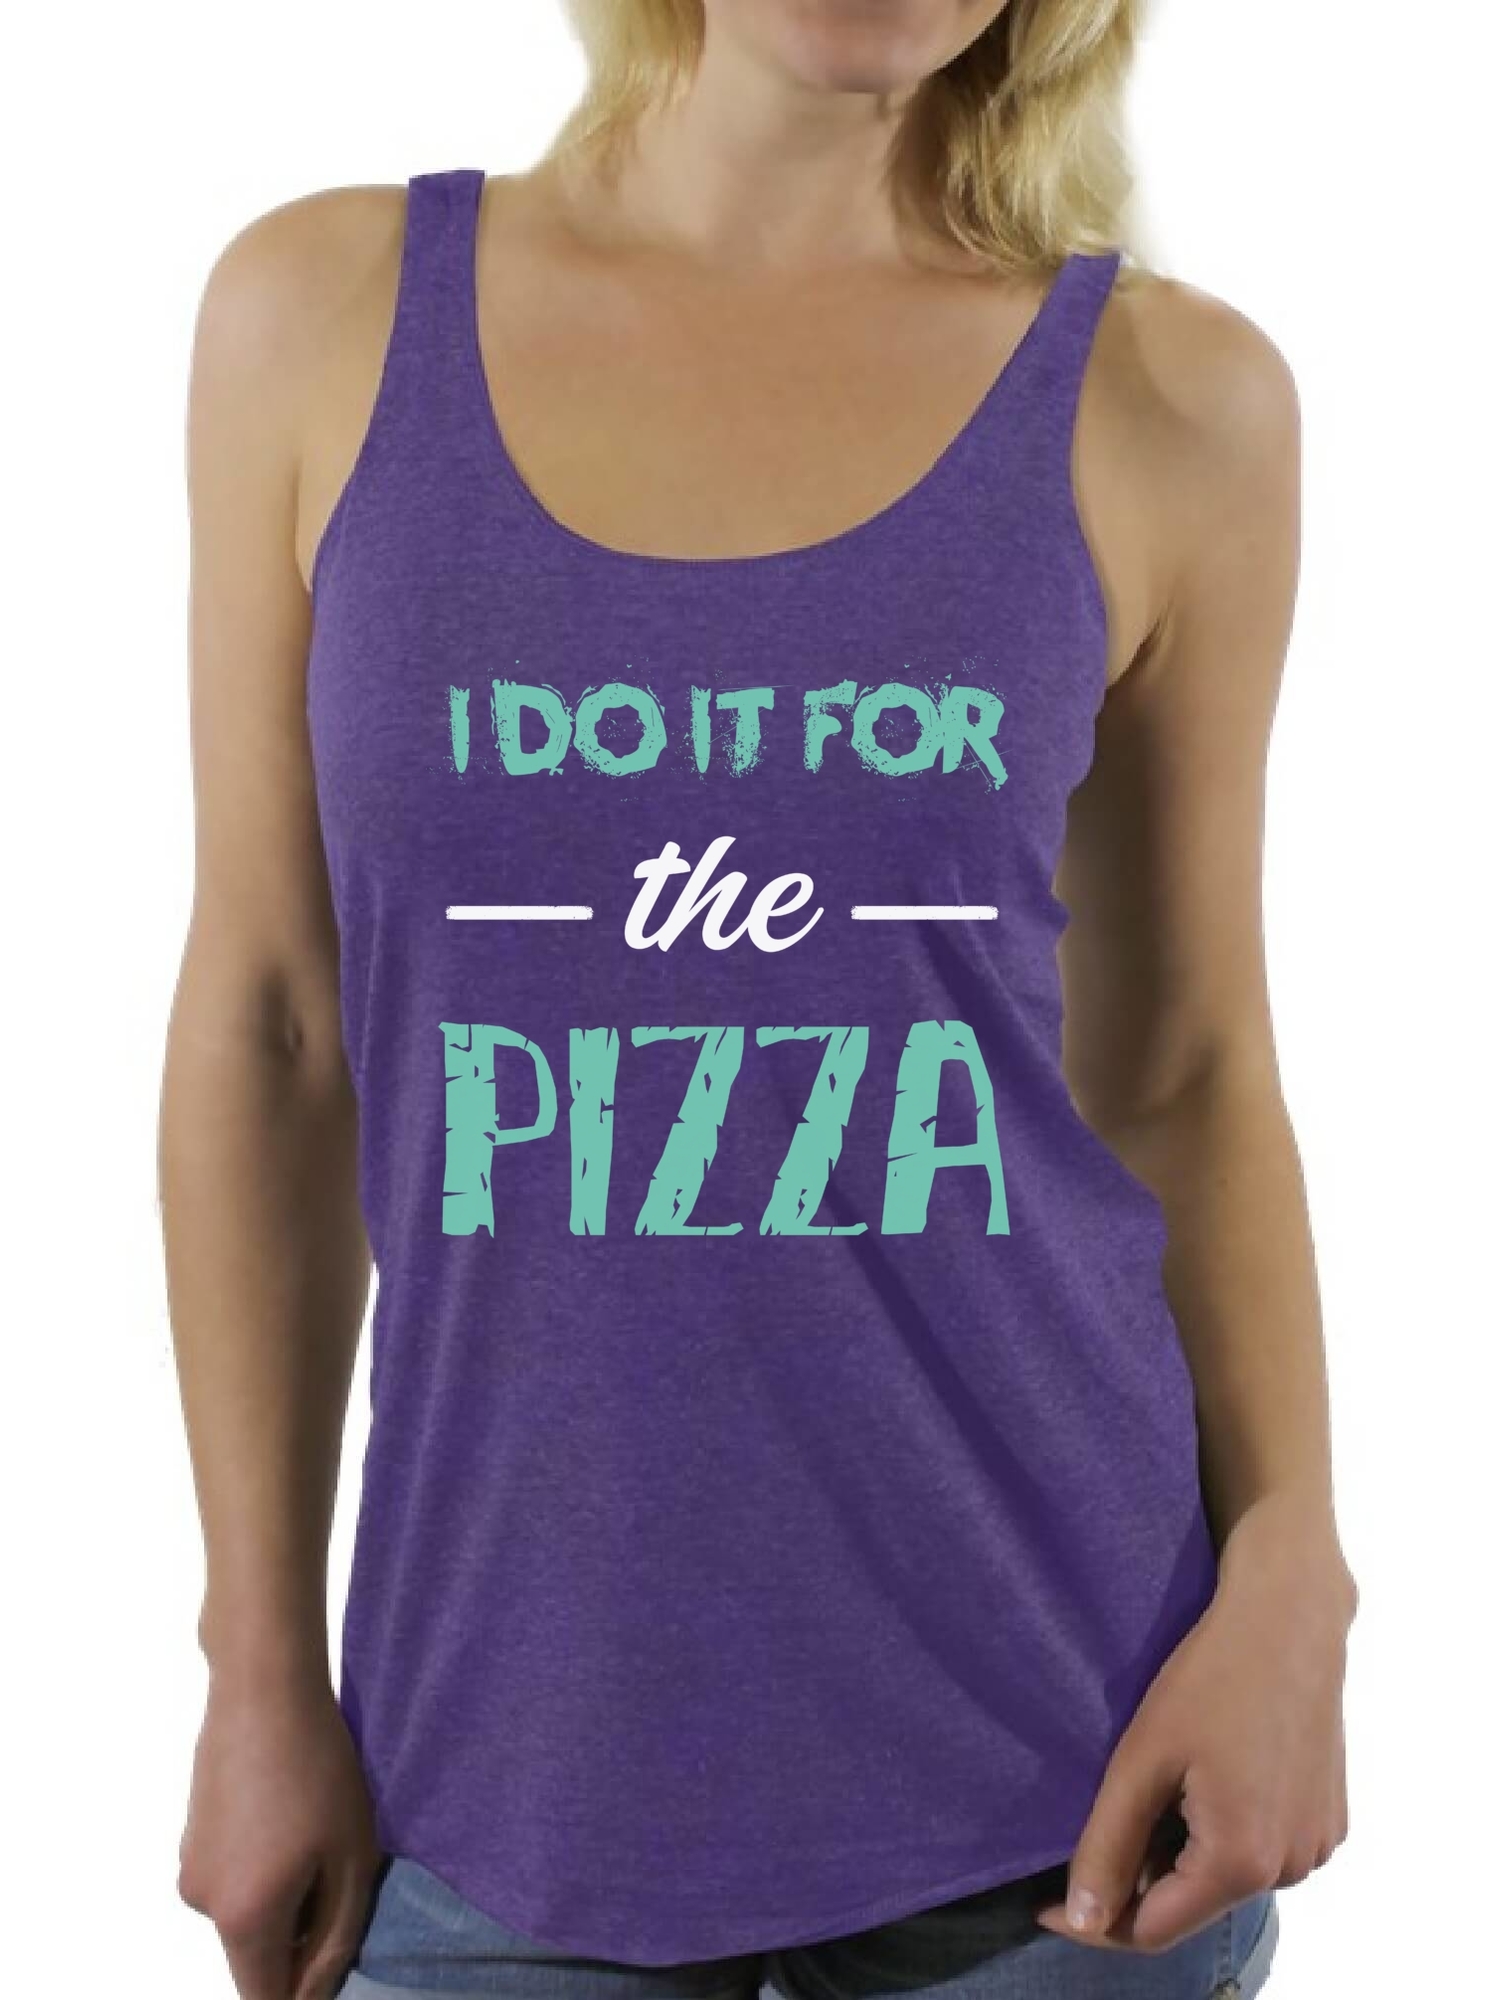 Awkward Styles Women's I Do It For the Pizza Graphic Racerback Tank Tops GYM Funny Workout Saying - image 1 of 4